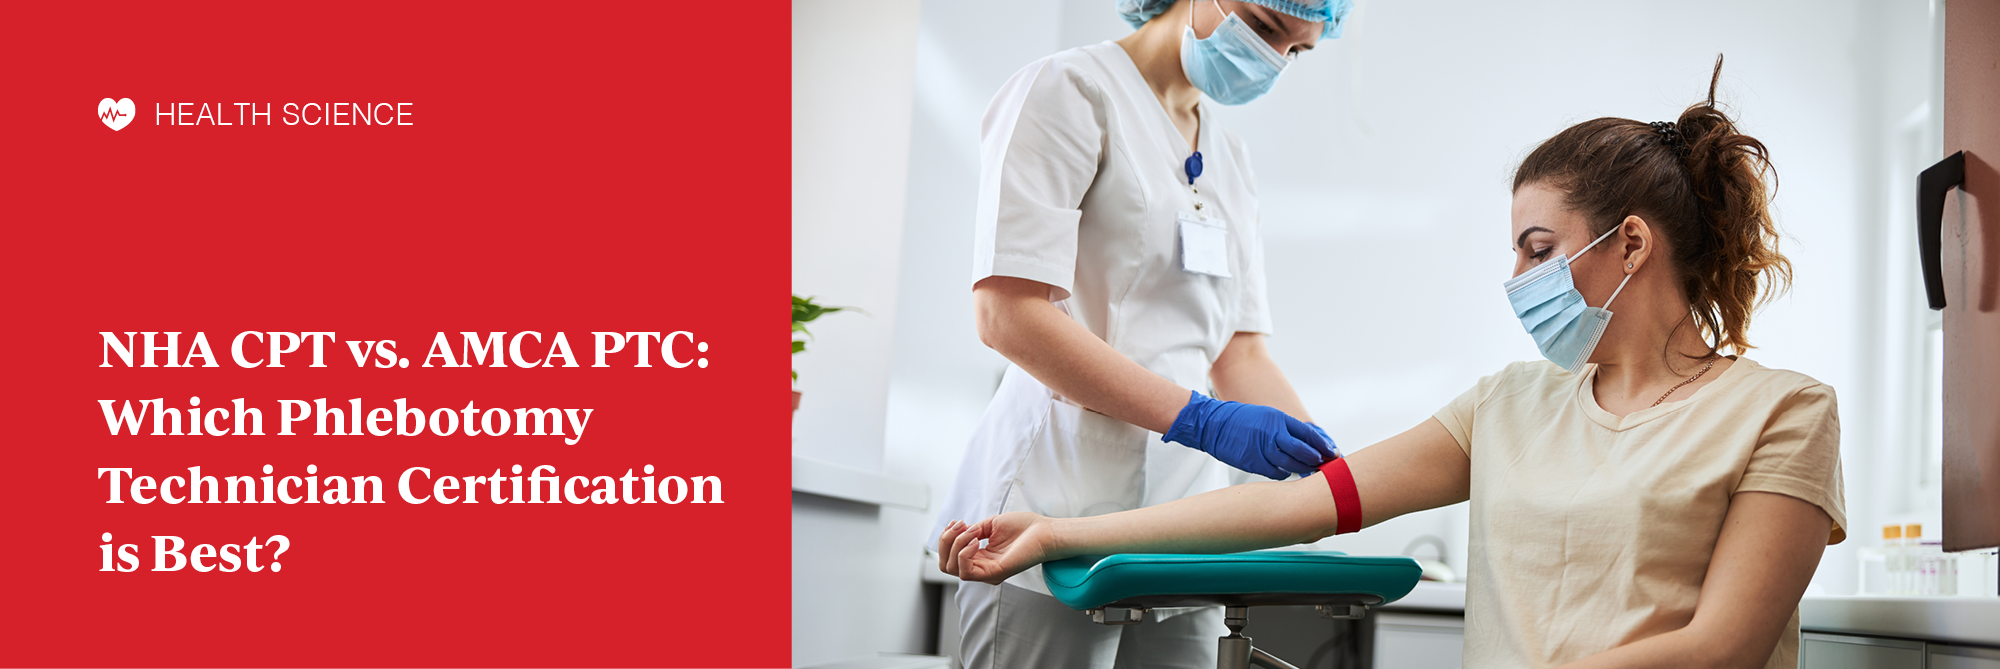 NHA CPT vs. AMCA PTC: Which Phlebotomy Technician Certification is Best?